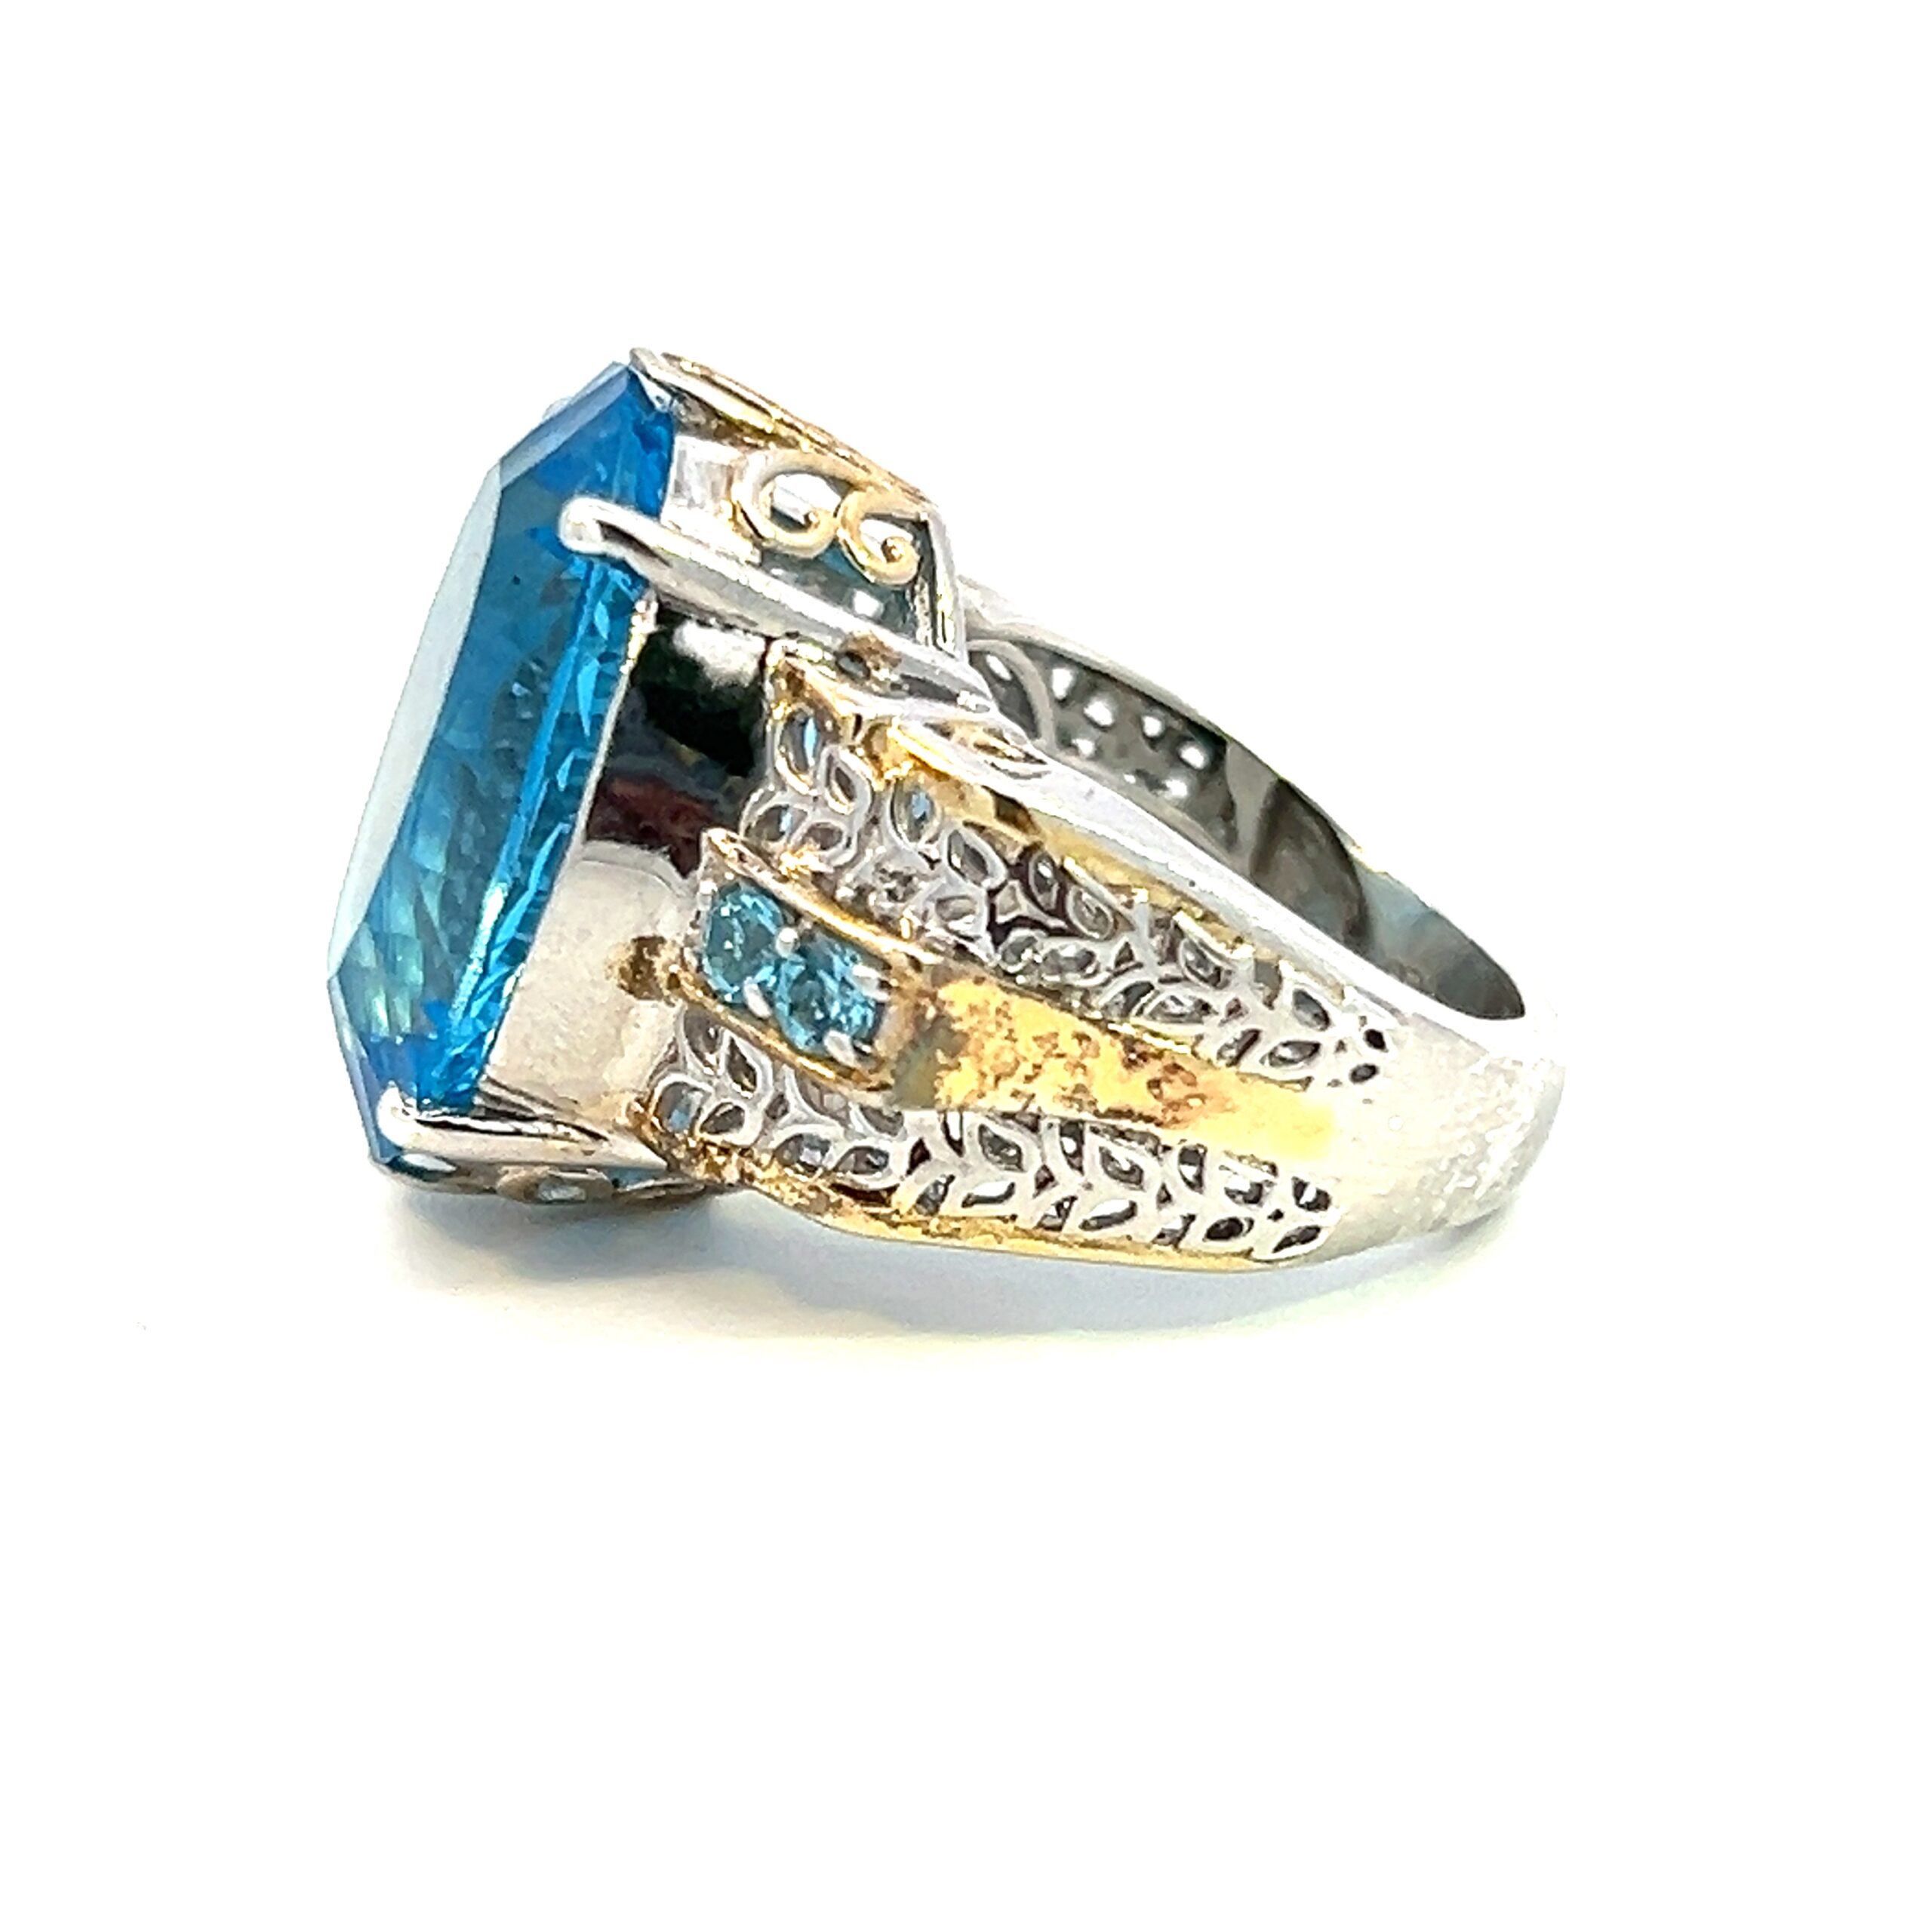 One estate two-tone blue topaz ring crafted from sterling silver with yellow gold-plated accents. The ring is set with a center 19x15mm oval blue topaz. The shoulders of the ring feature a center row of round blue topazes with nature-inspired filigree accents on both sides and nature-inspired filigree accents in the gallery area of the center setting. The gold plated accented are in the band only.